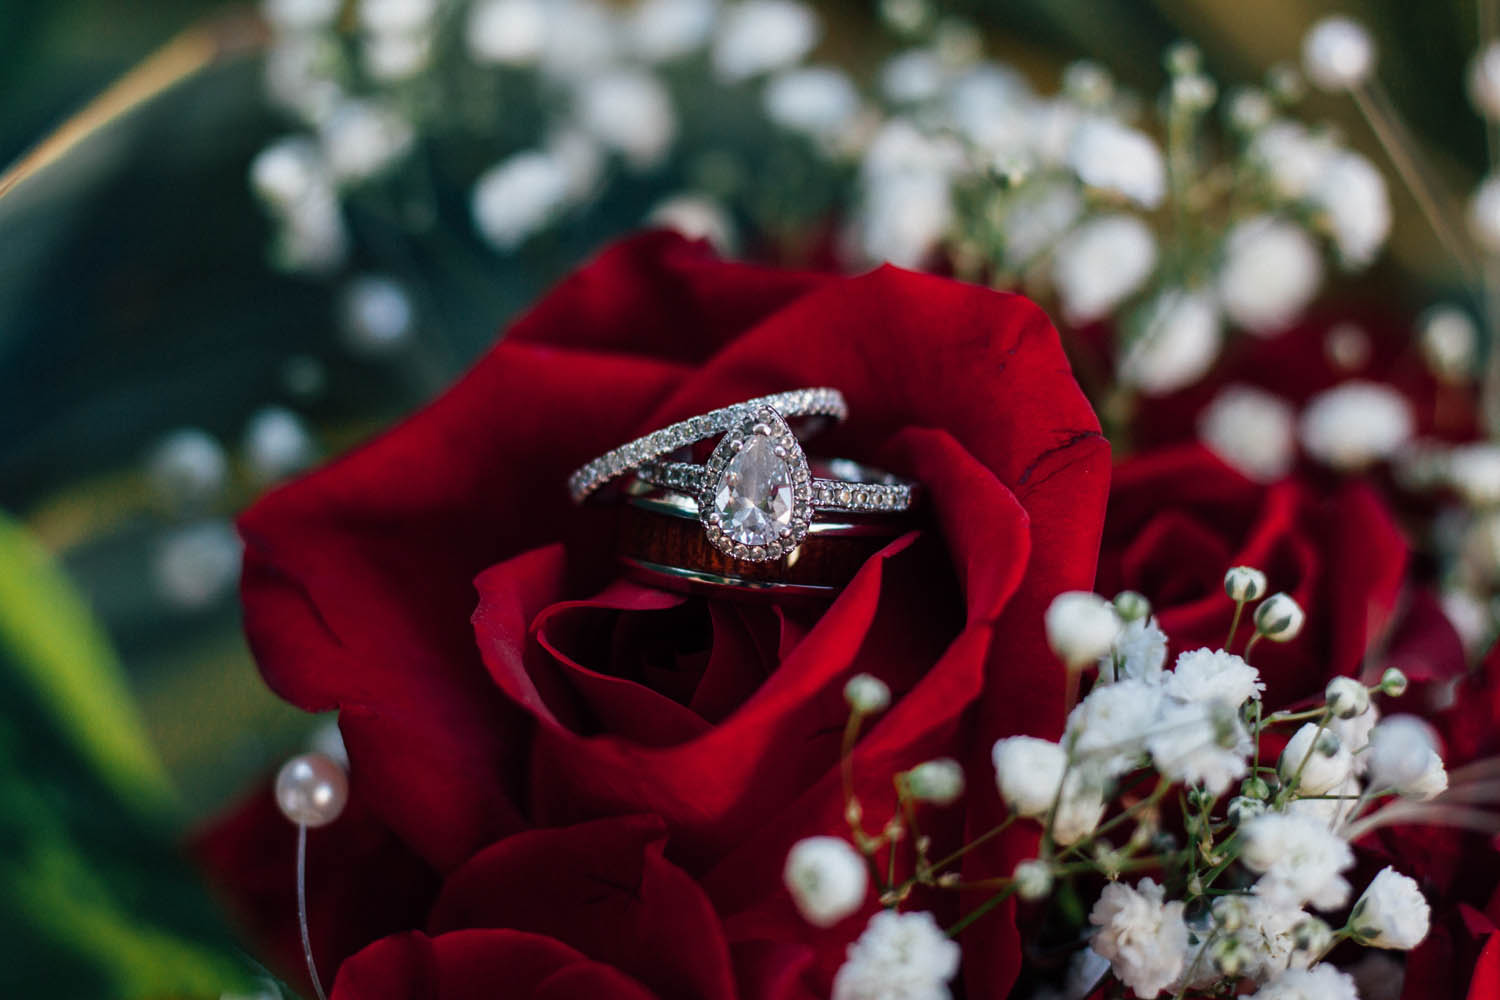 wedding and engagement rings in a red rose